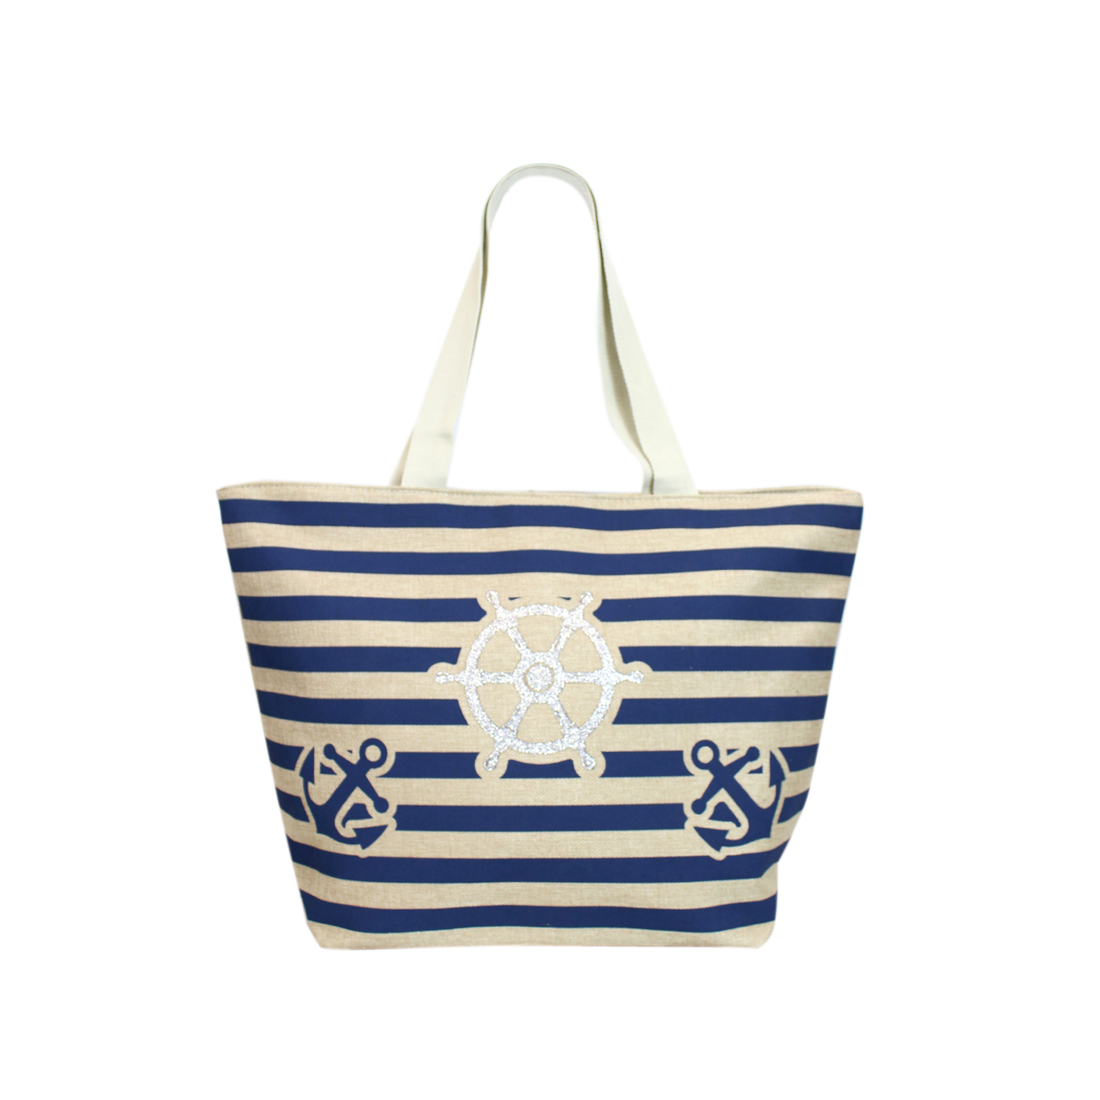 Stripped blue with anchor and helm print